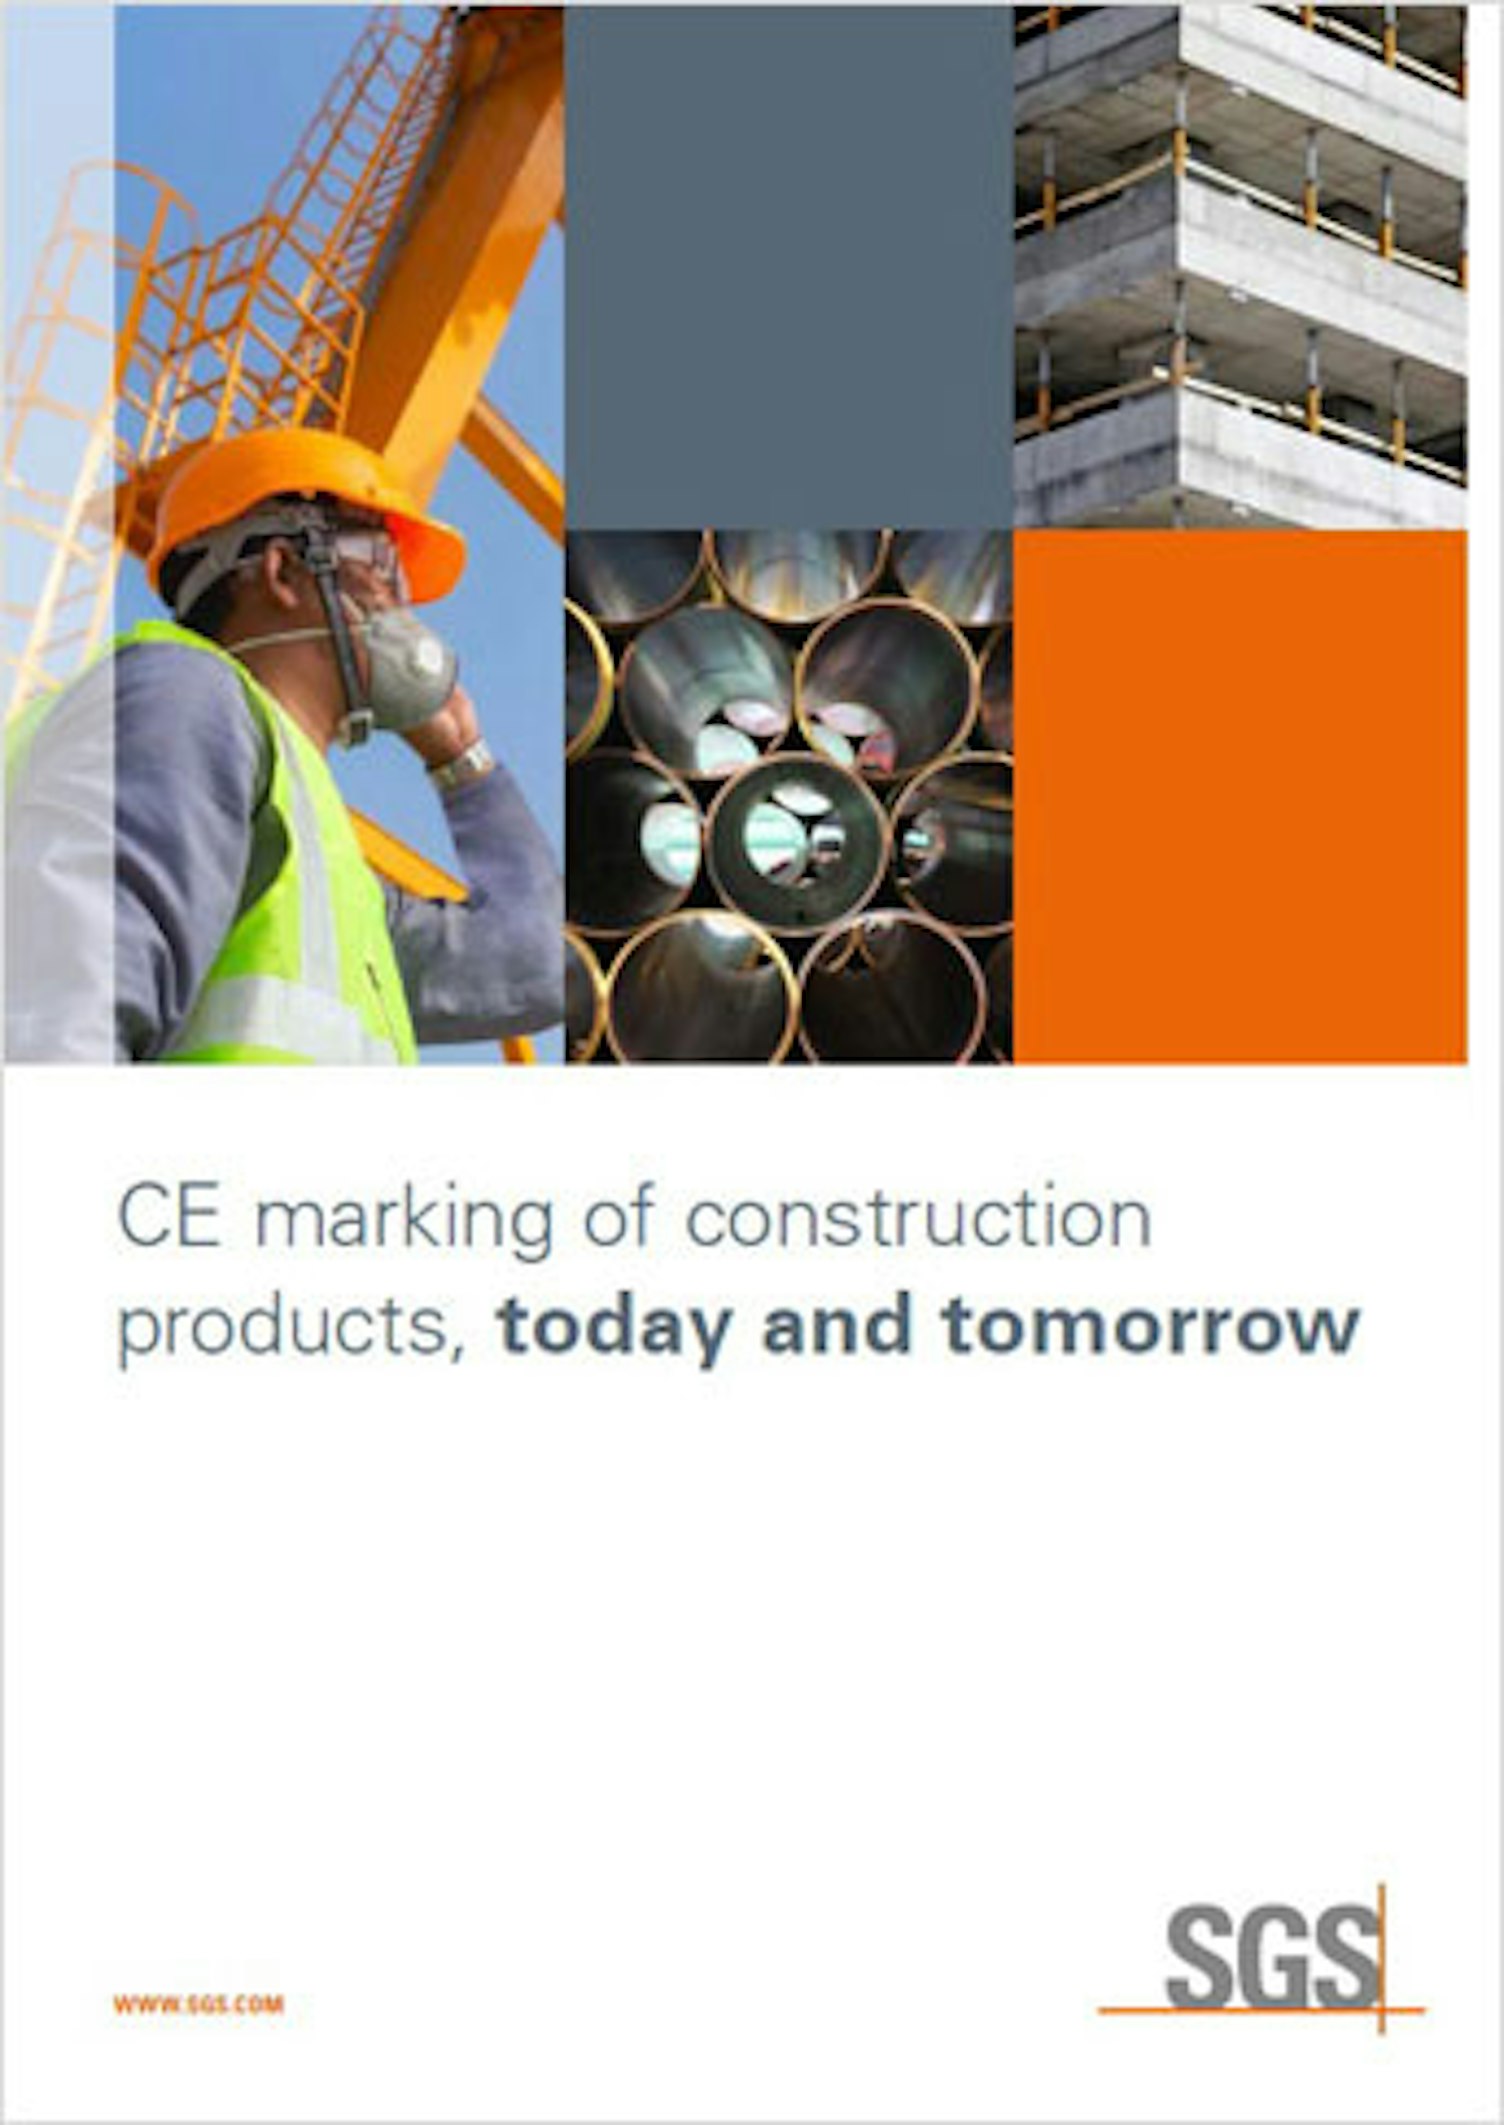 SGS Whitepaper CE Marking of Construction Products Today and Tomorrow